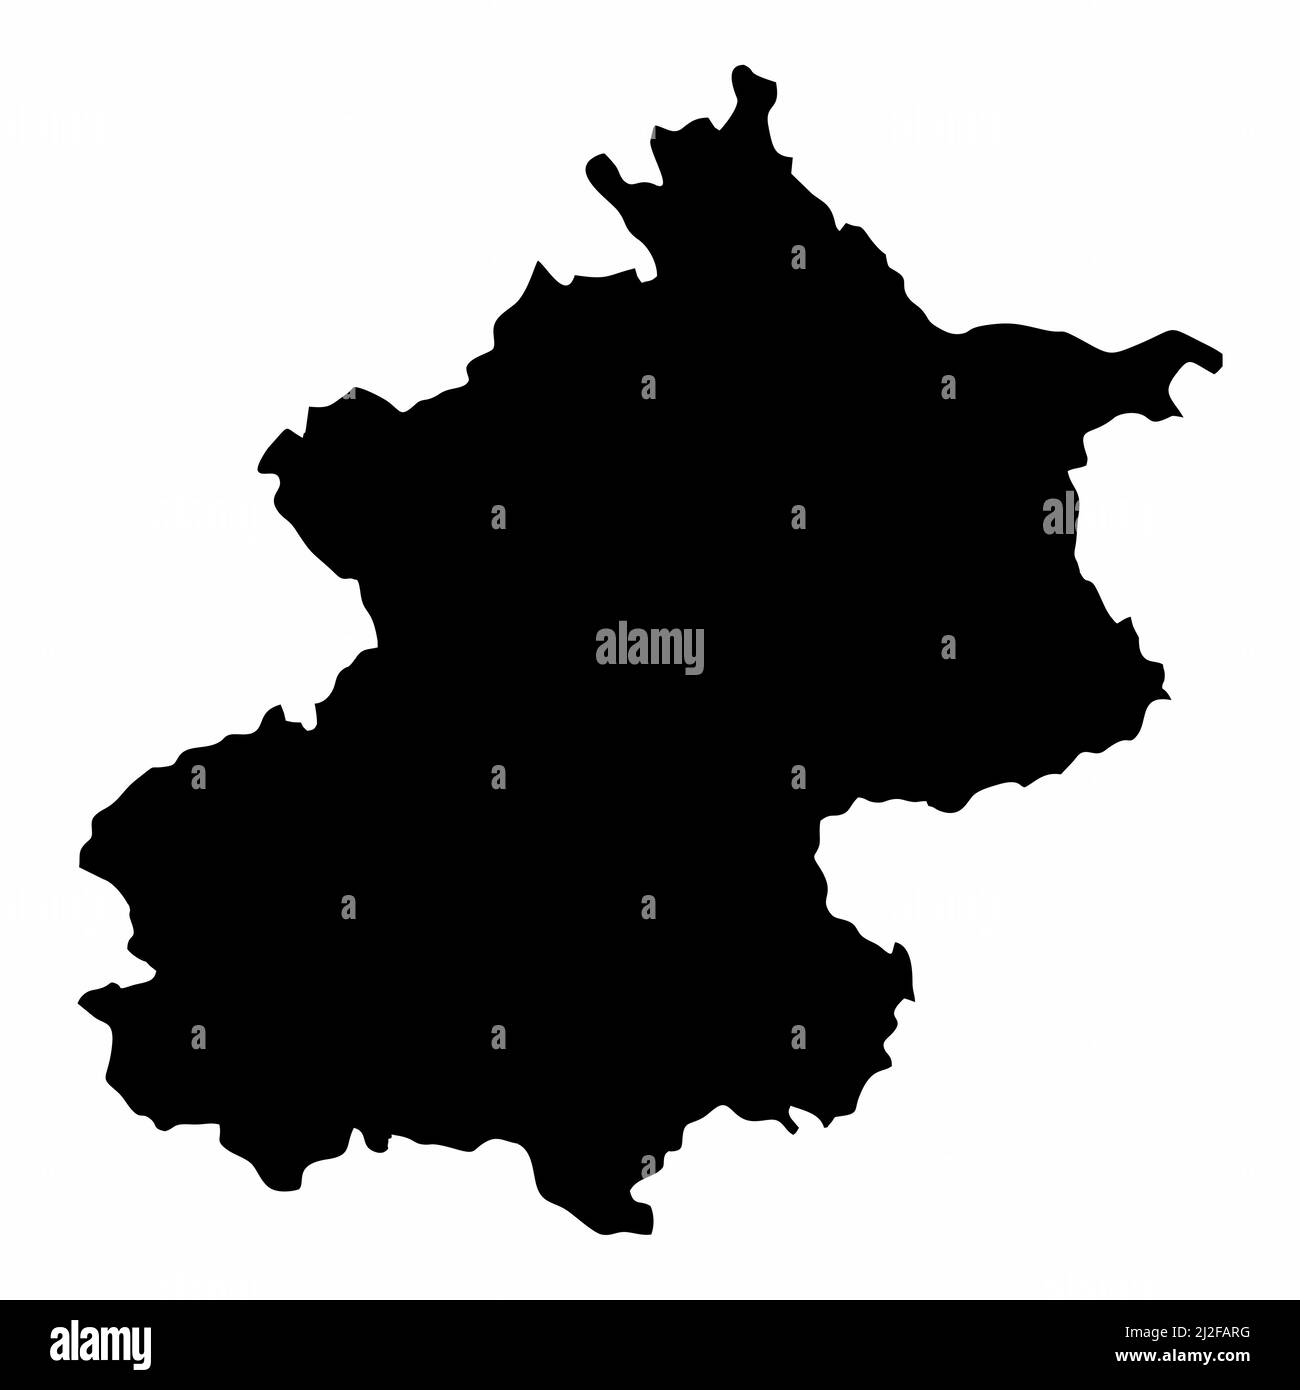 The Beijing city, silhouette map isolated on white background, China Stock Vector